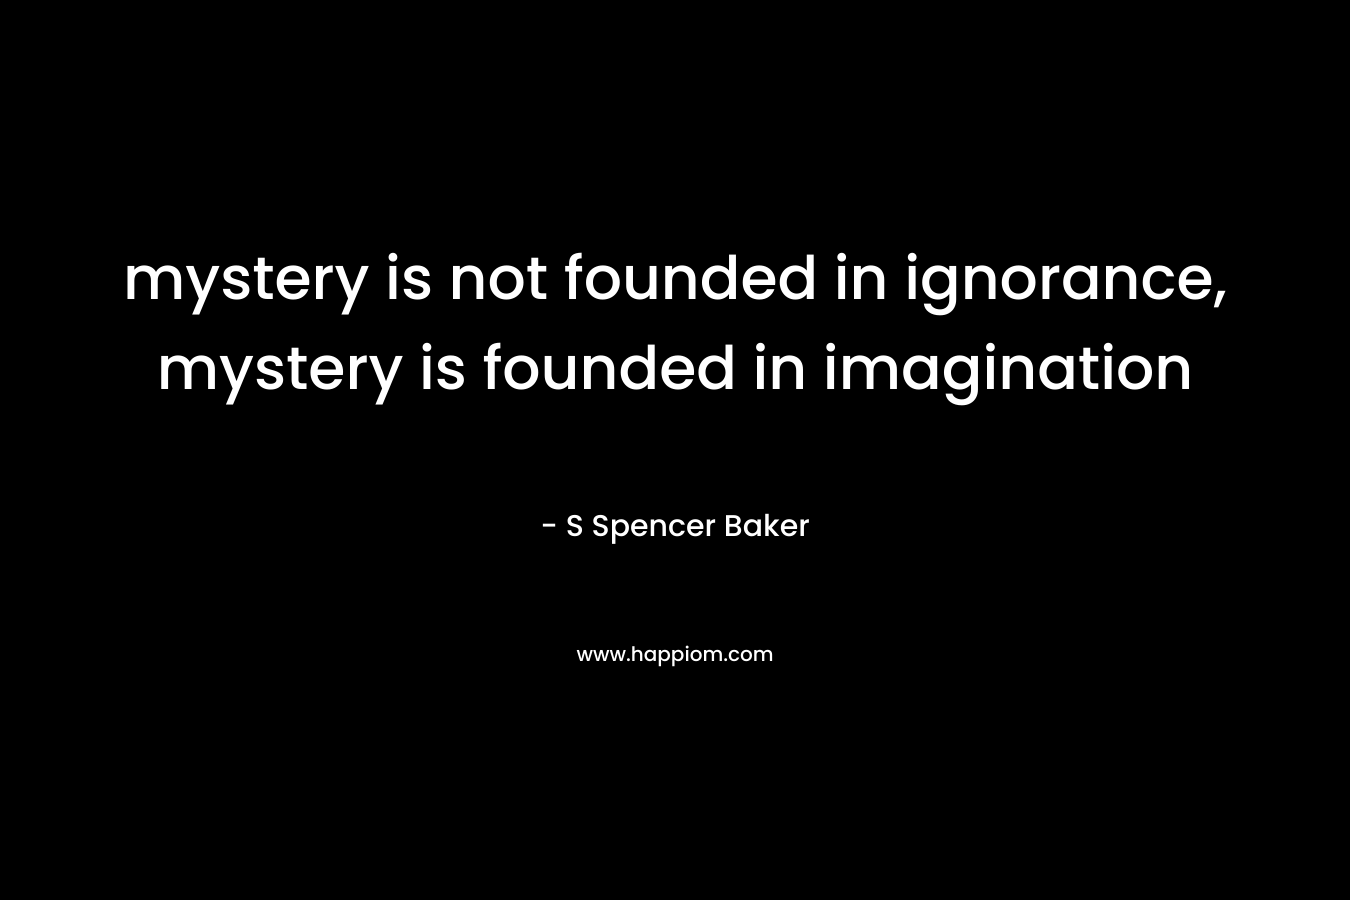 mystery is not founded in ignorance, mystery is founded in imagination